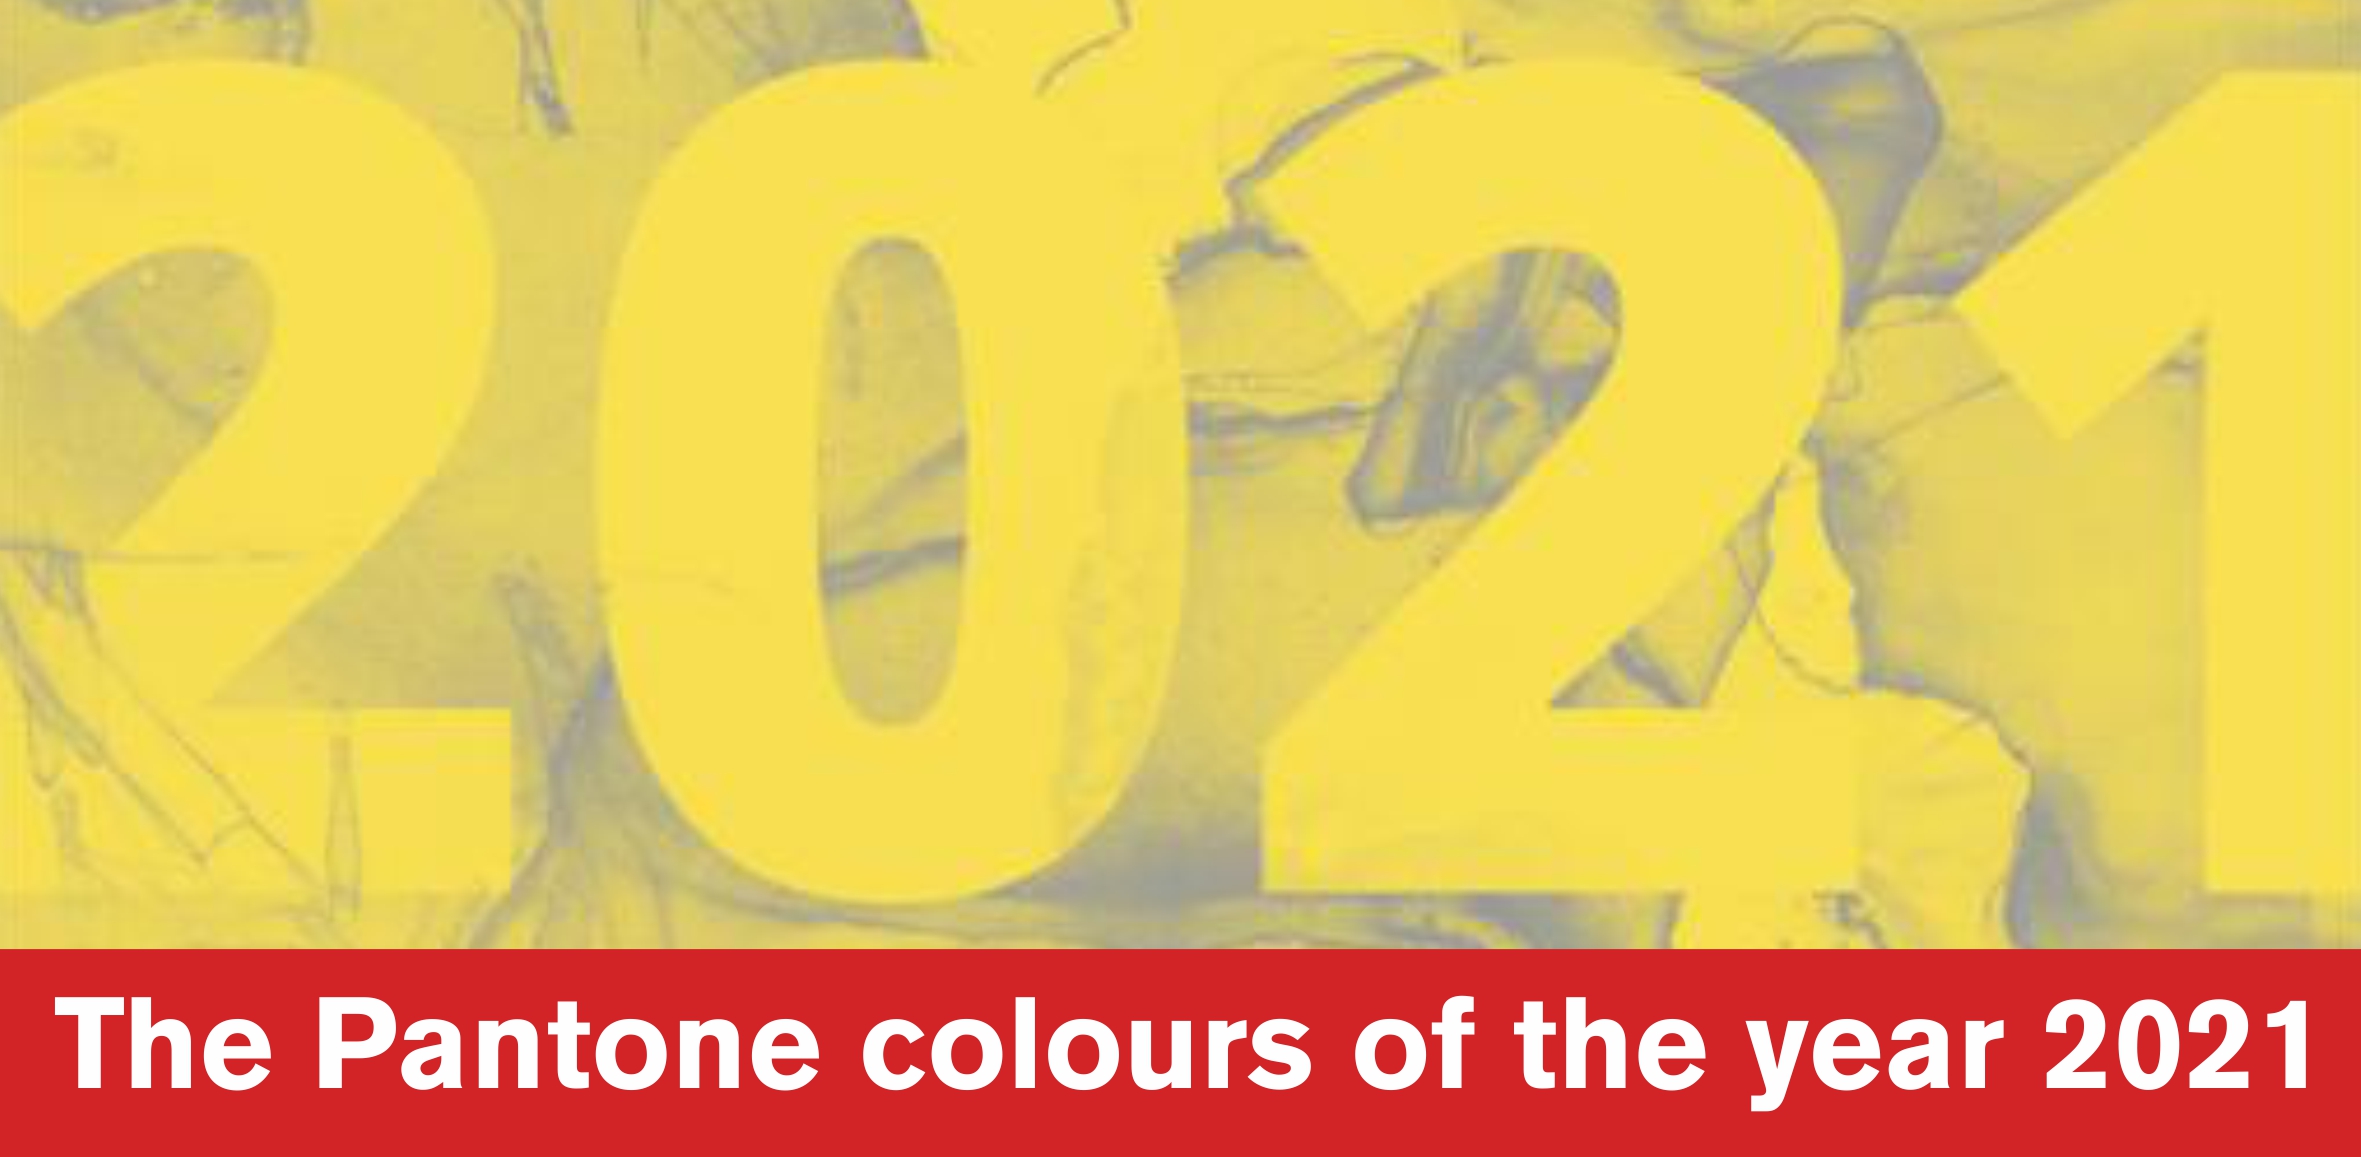 The Pantone colours of the year 2021